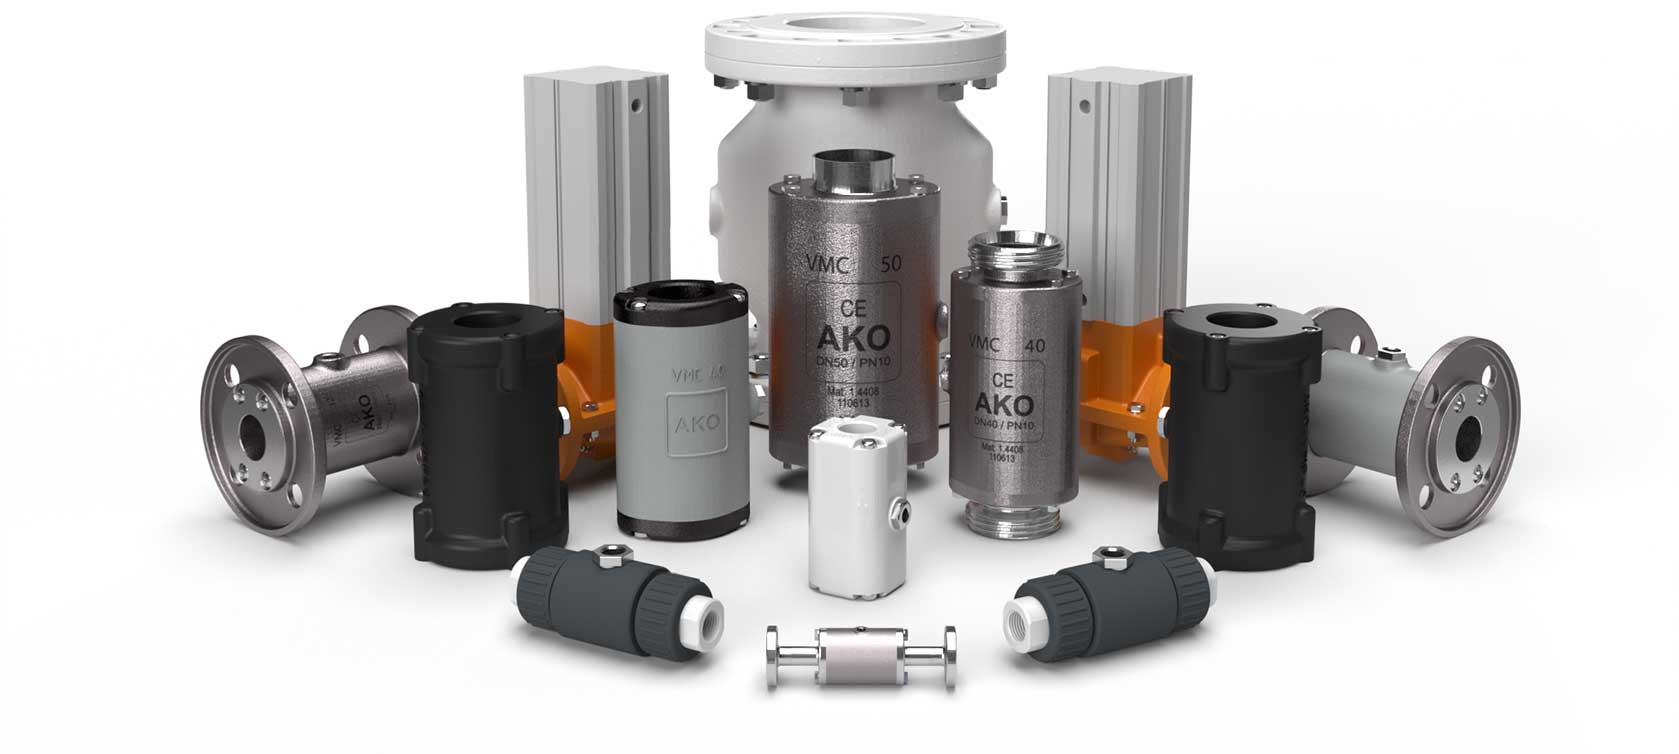 Selection of pinch valves from AKO Armaturen